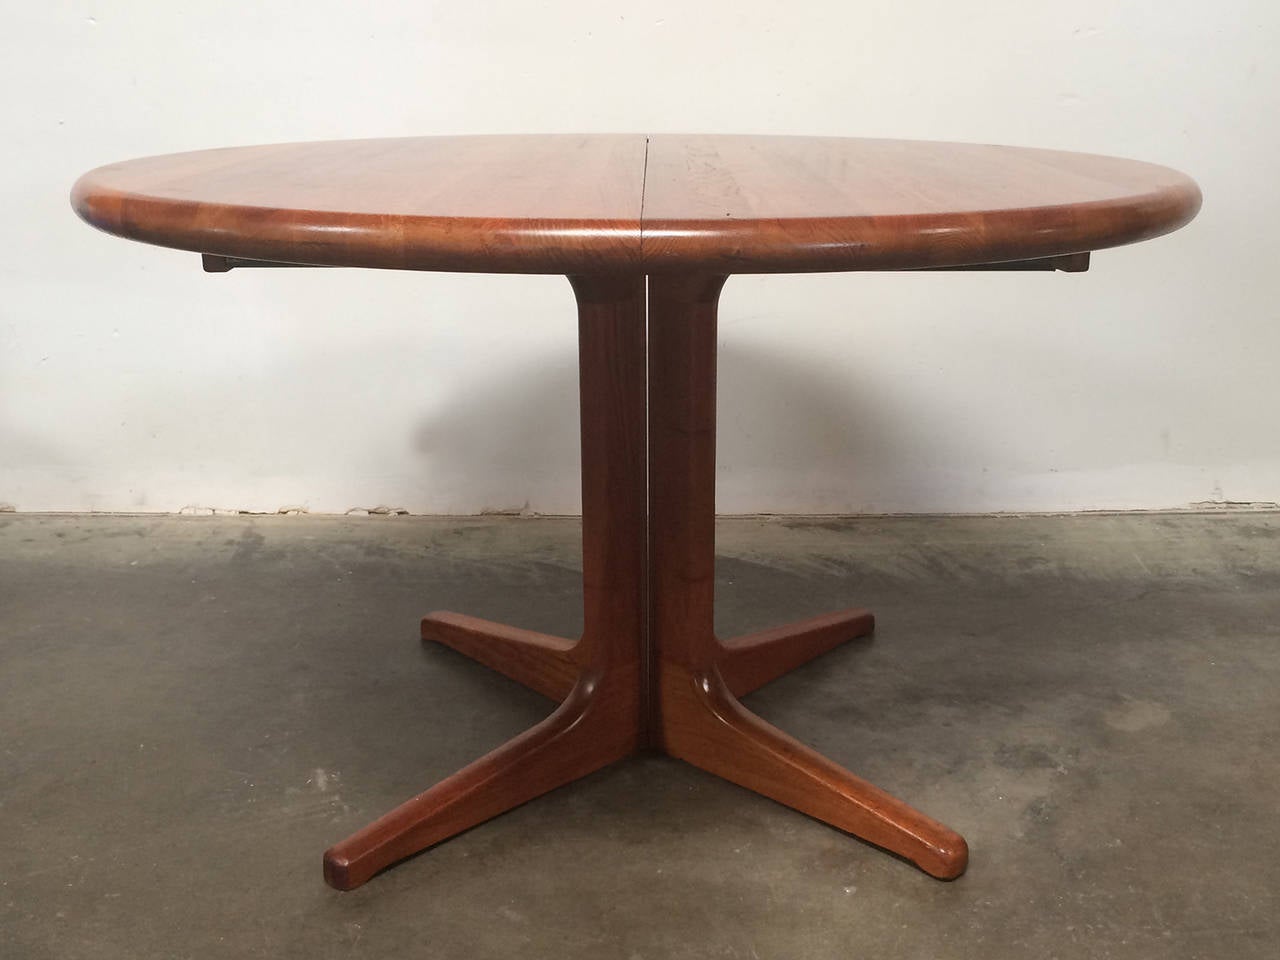 Danish designed  by Glostrup Mobel Fabric this table is made of teak. It has two leaves to expand from round dimension of 47